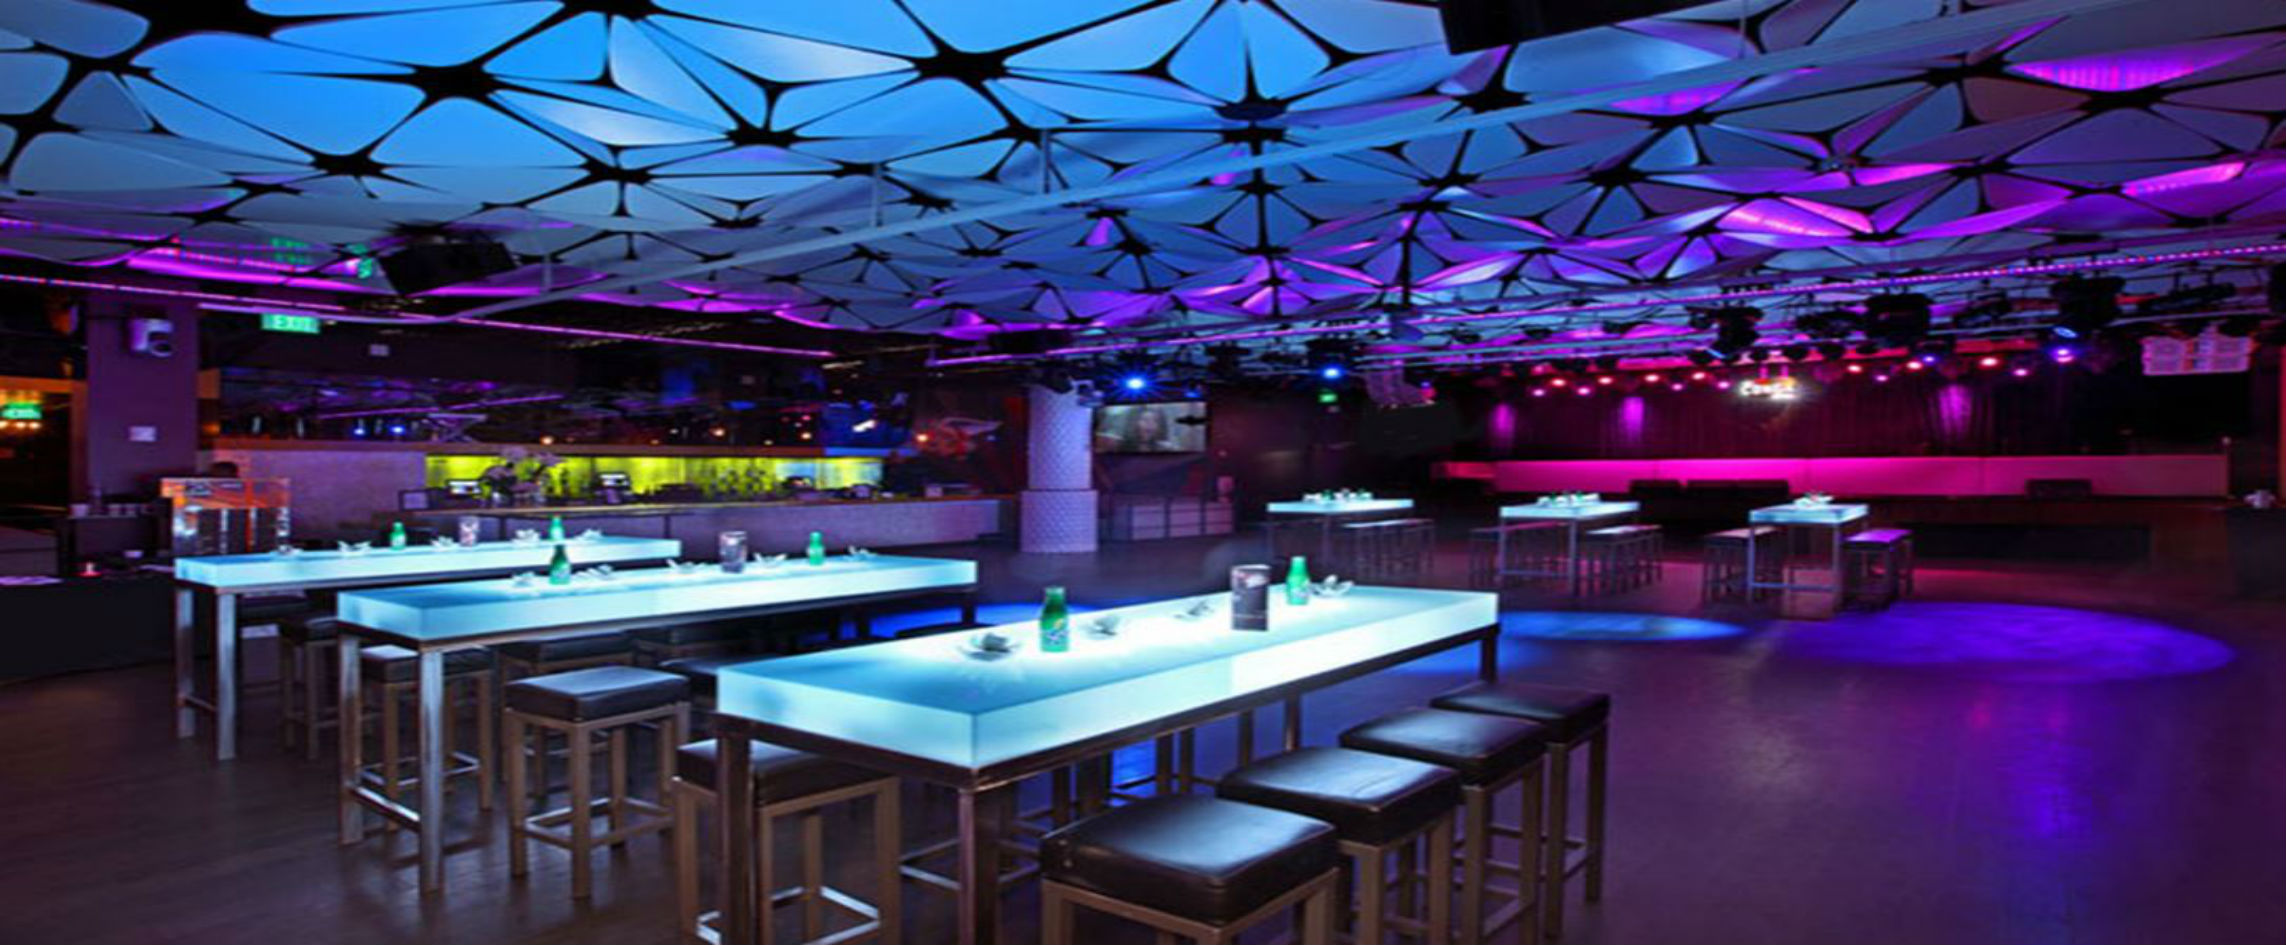 Conga Room Los Angeles Vip Tables Prices I Club Bookers